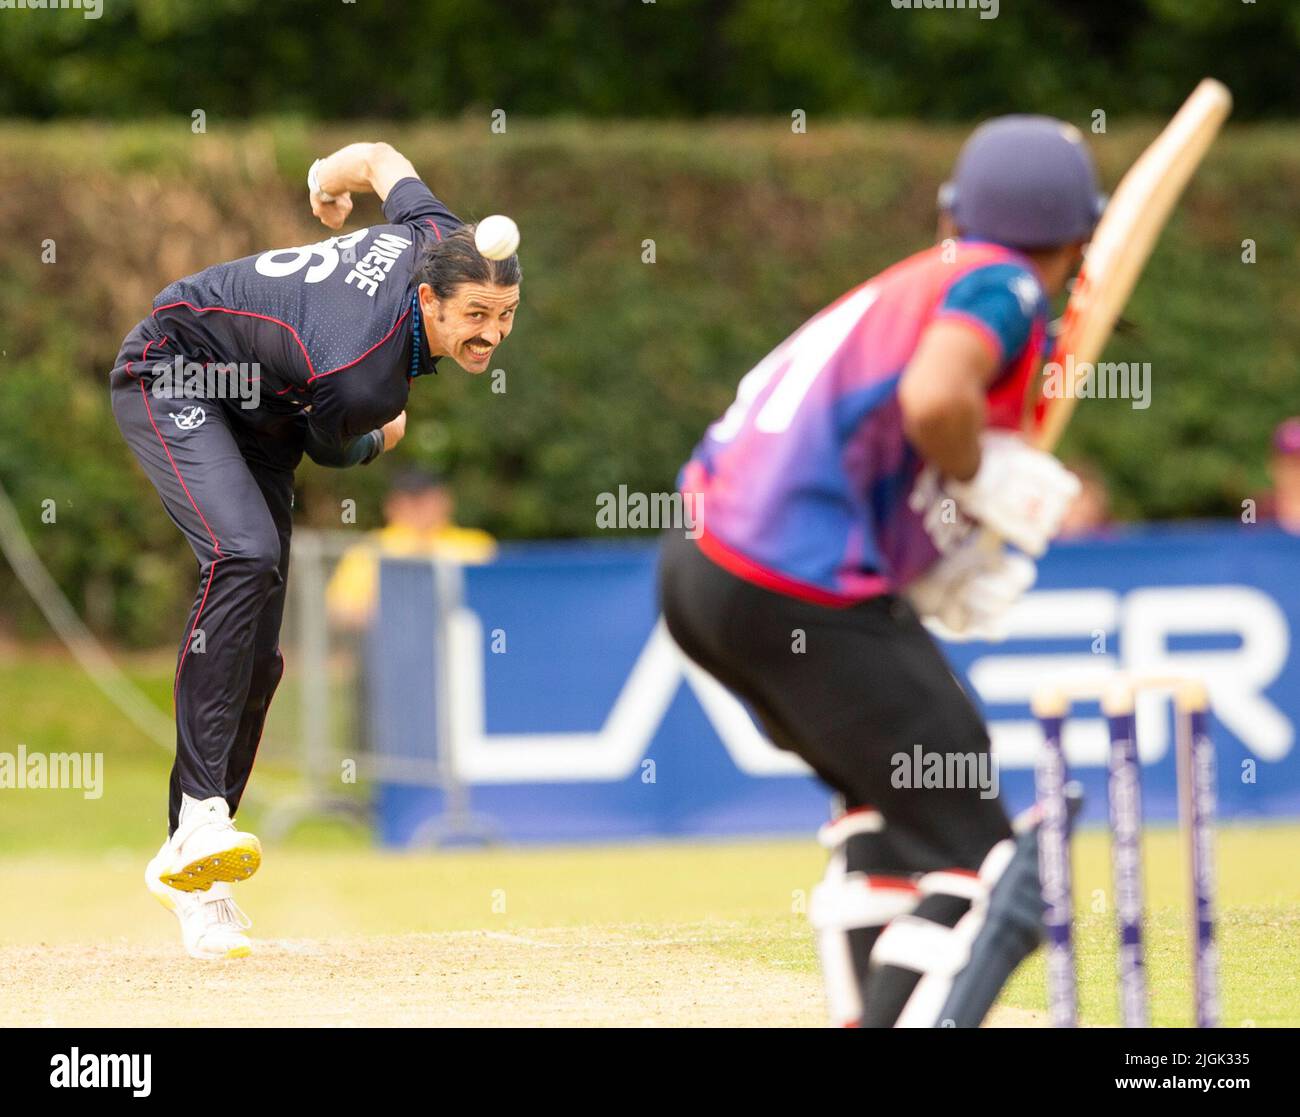 ICC Men's Cricket World Cup League 2 - Nepal v, Namibia. 10th July, 2022. Nepal take on Namibia in the ICC Men's Cricket World Cup League 2 at Cambusdoon, Ayr. Pic shows: Namibia's David Wiese bowls. Credit: Ian Jacobs/Alamy Live News Stock Photo